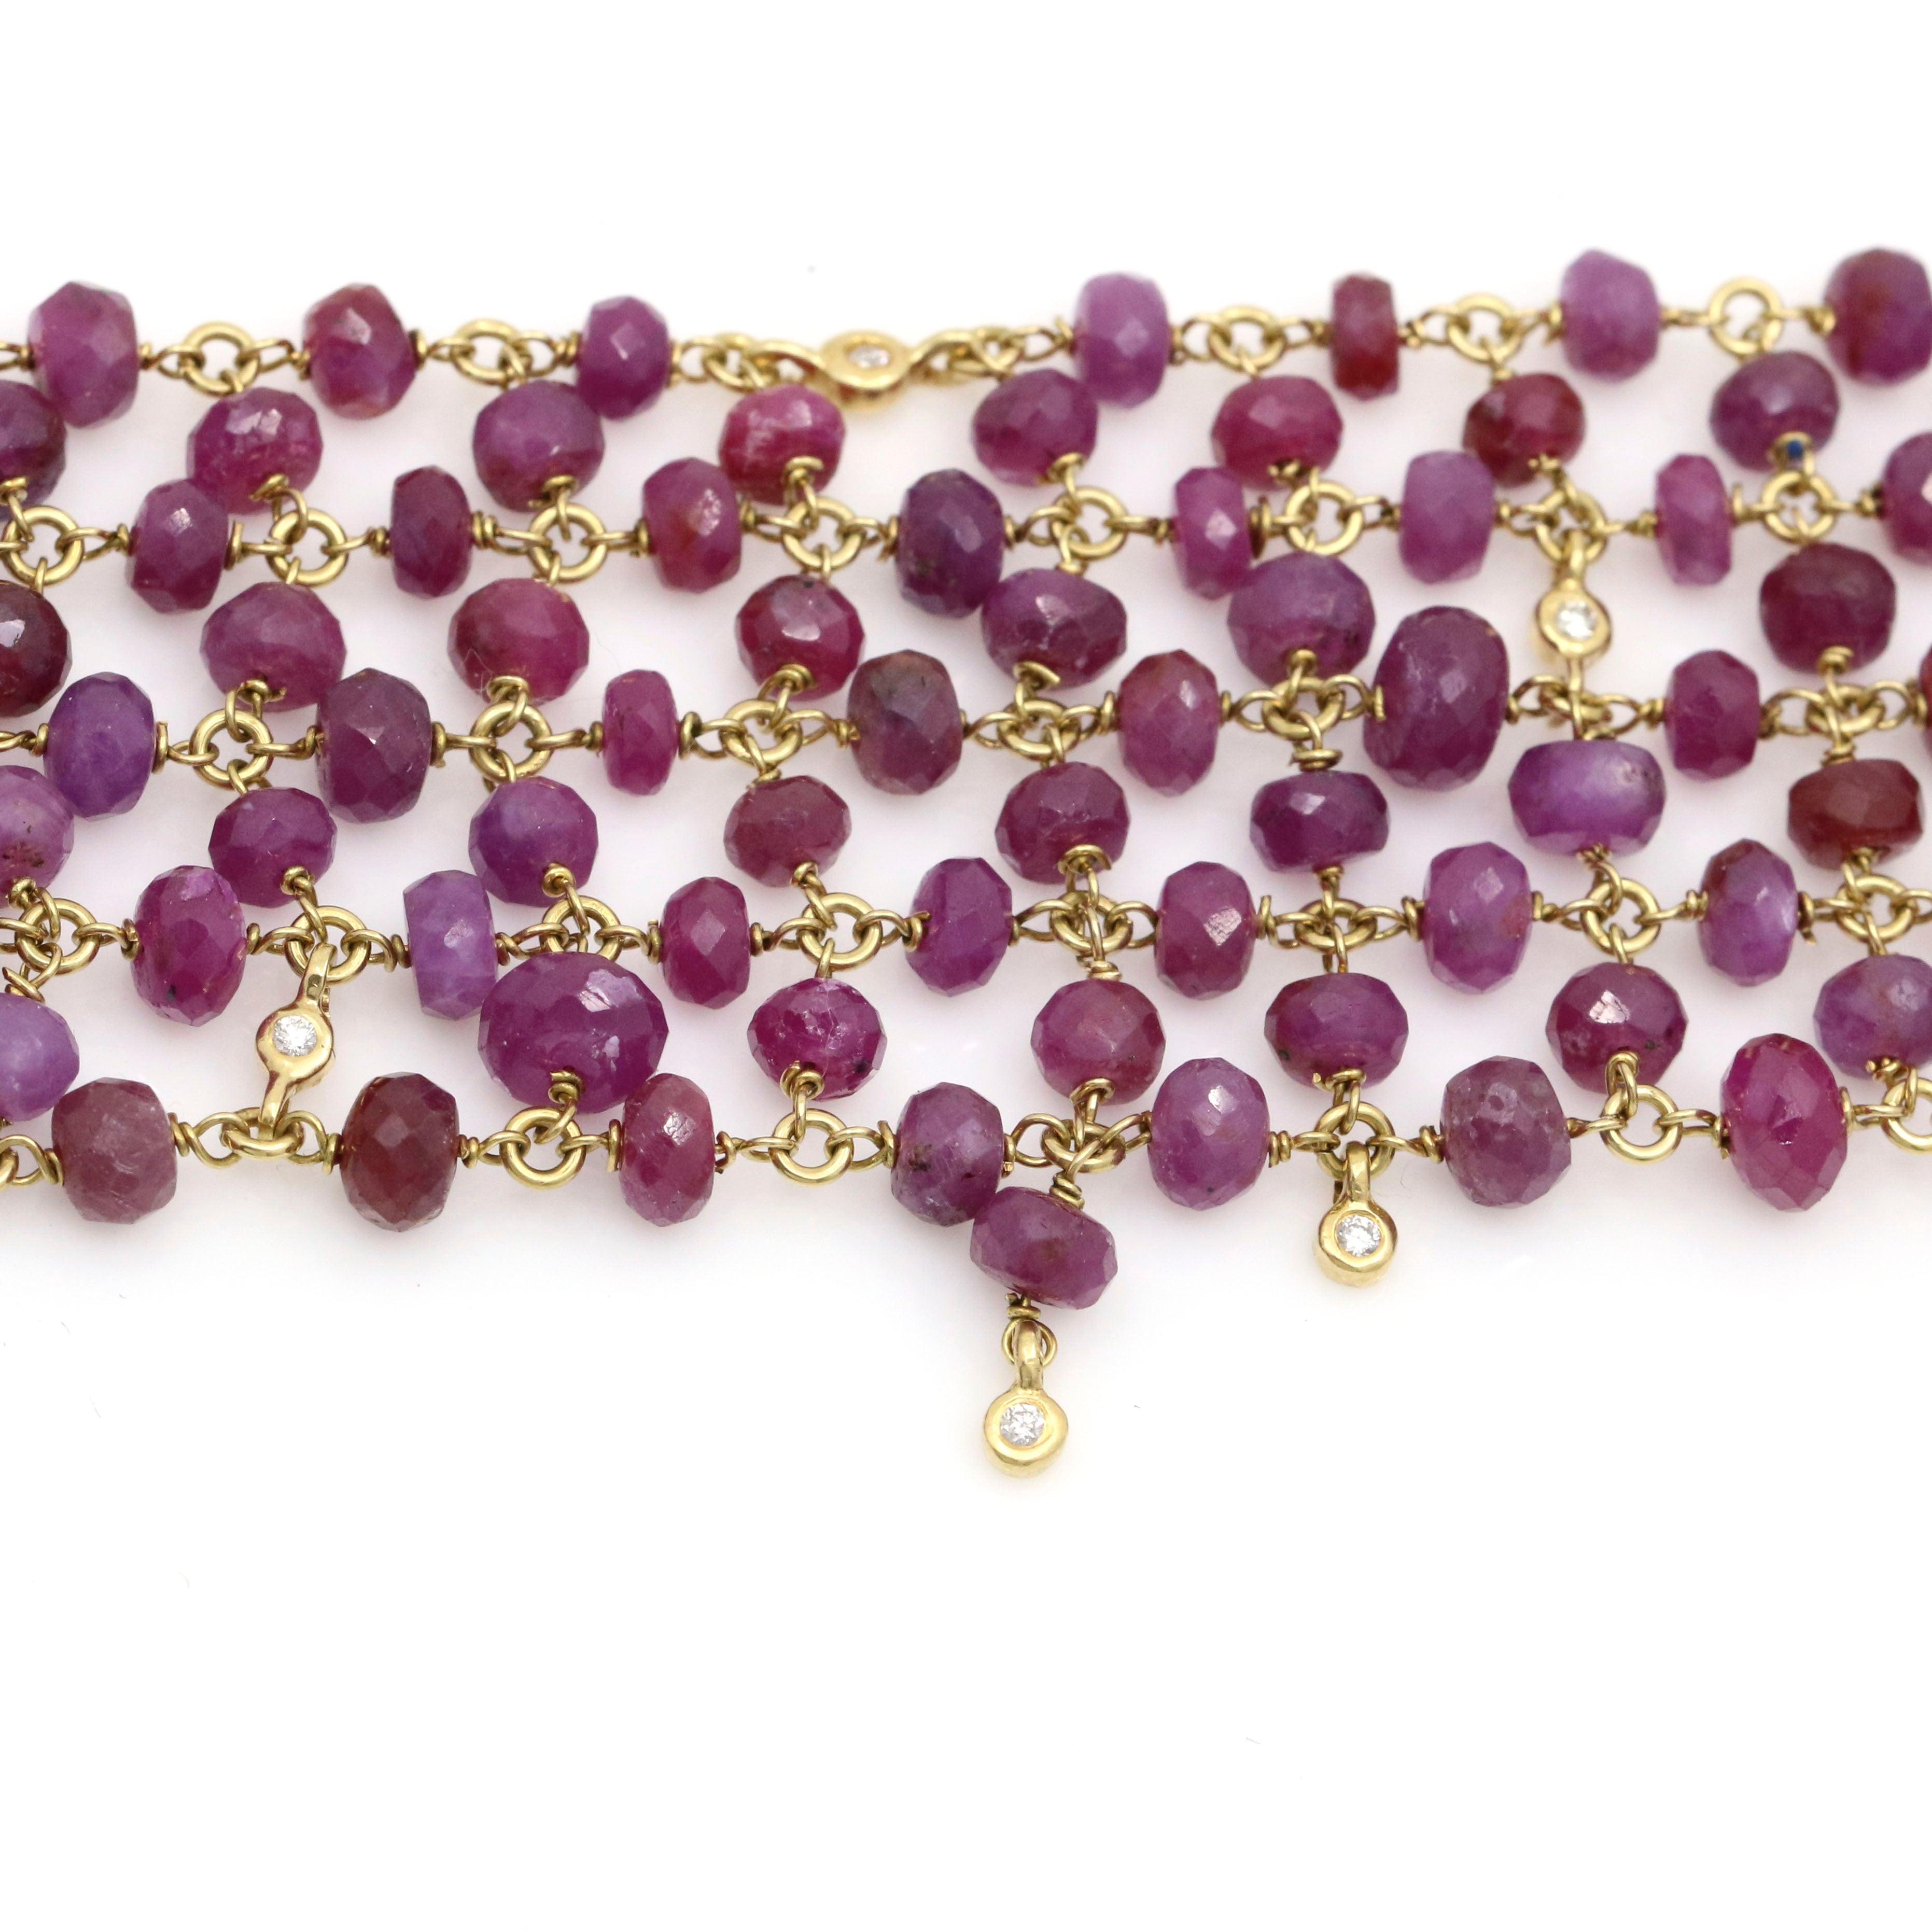 GEMSTONE NECKLACE, H. STERN, ca. 1998. Yellow gold 750. Classic necklace,  set throughout with 83 square-cut, rainbow-coloured Brazilian gemstones,  such as aquamarines, amethysts, peridots, tourmalines, garnets and topazes,  weighing ca. 50.00 ct.